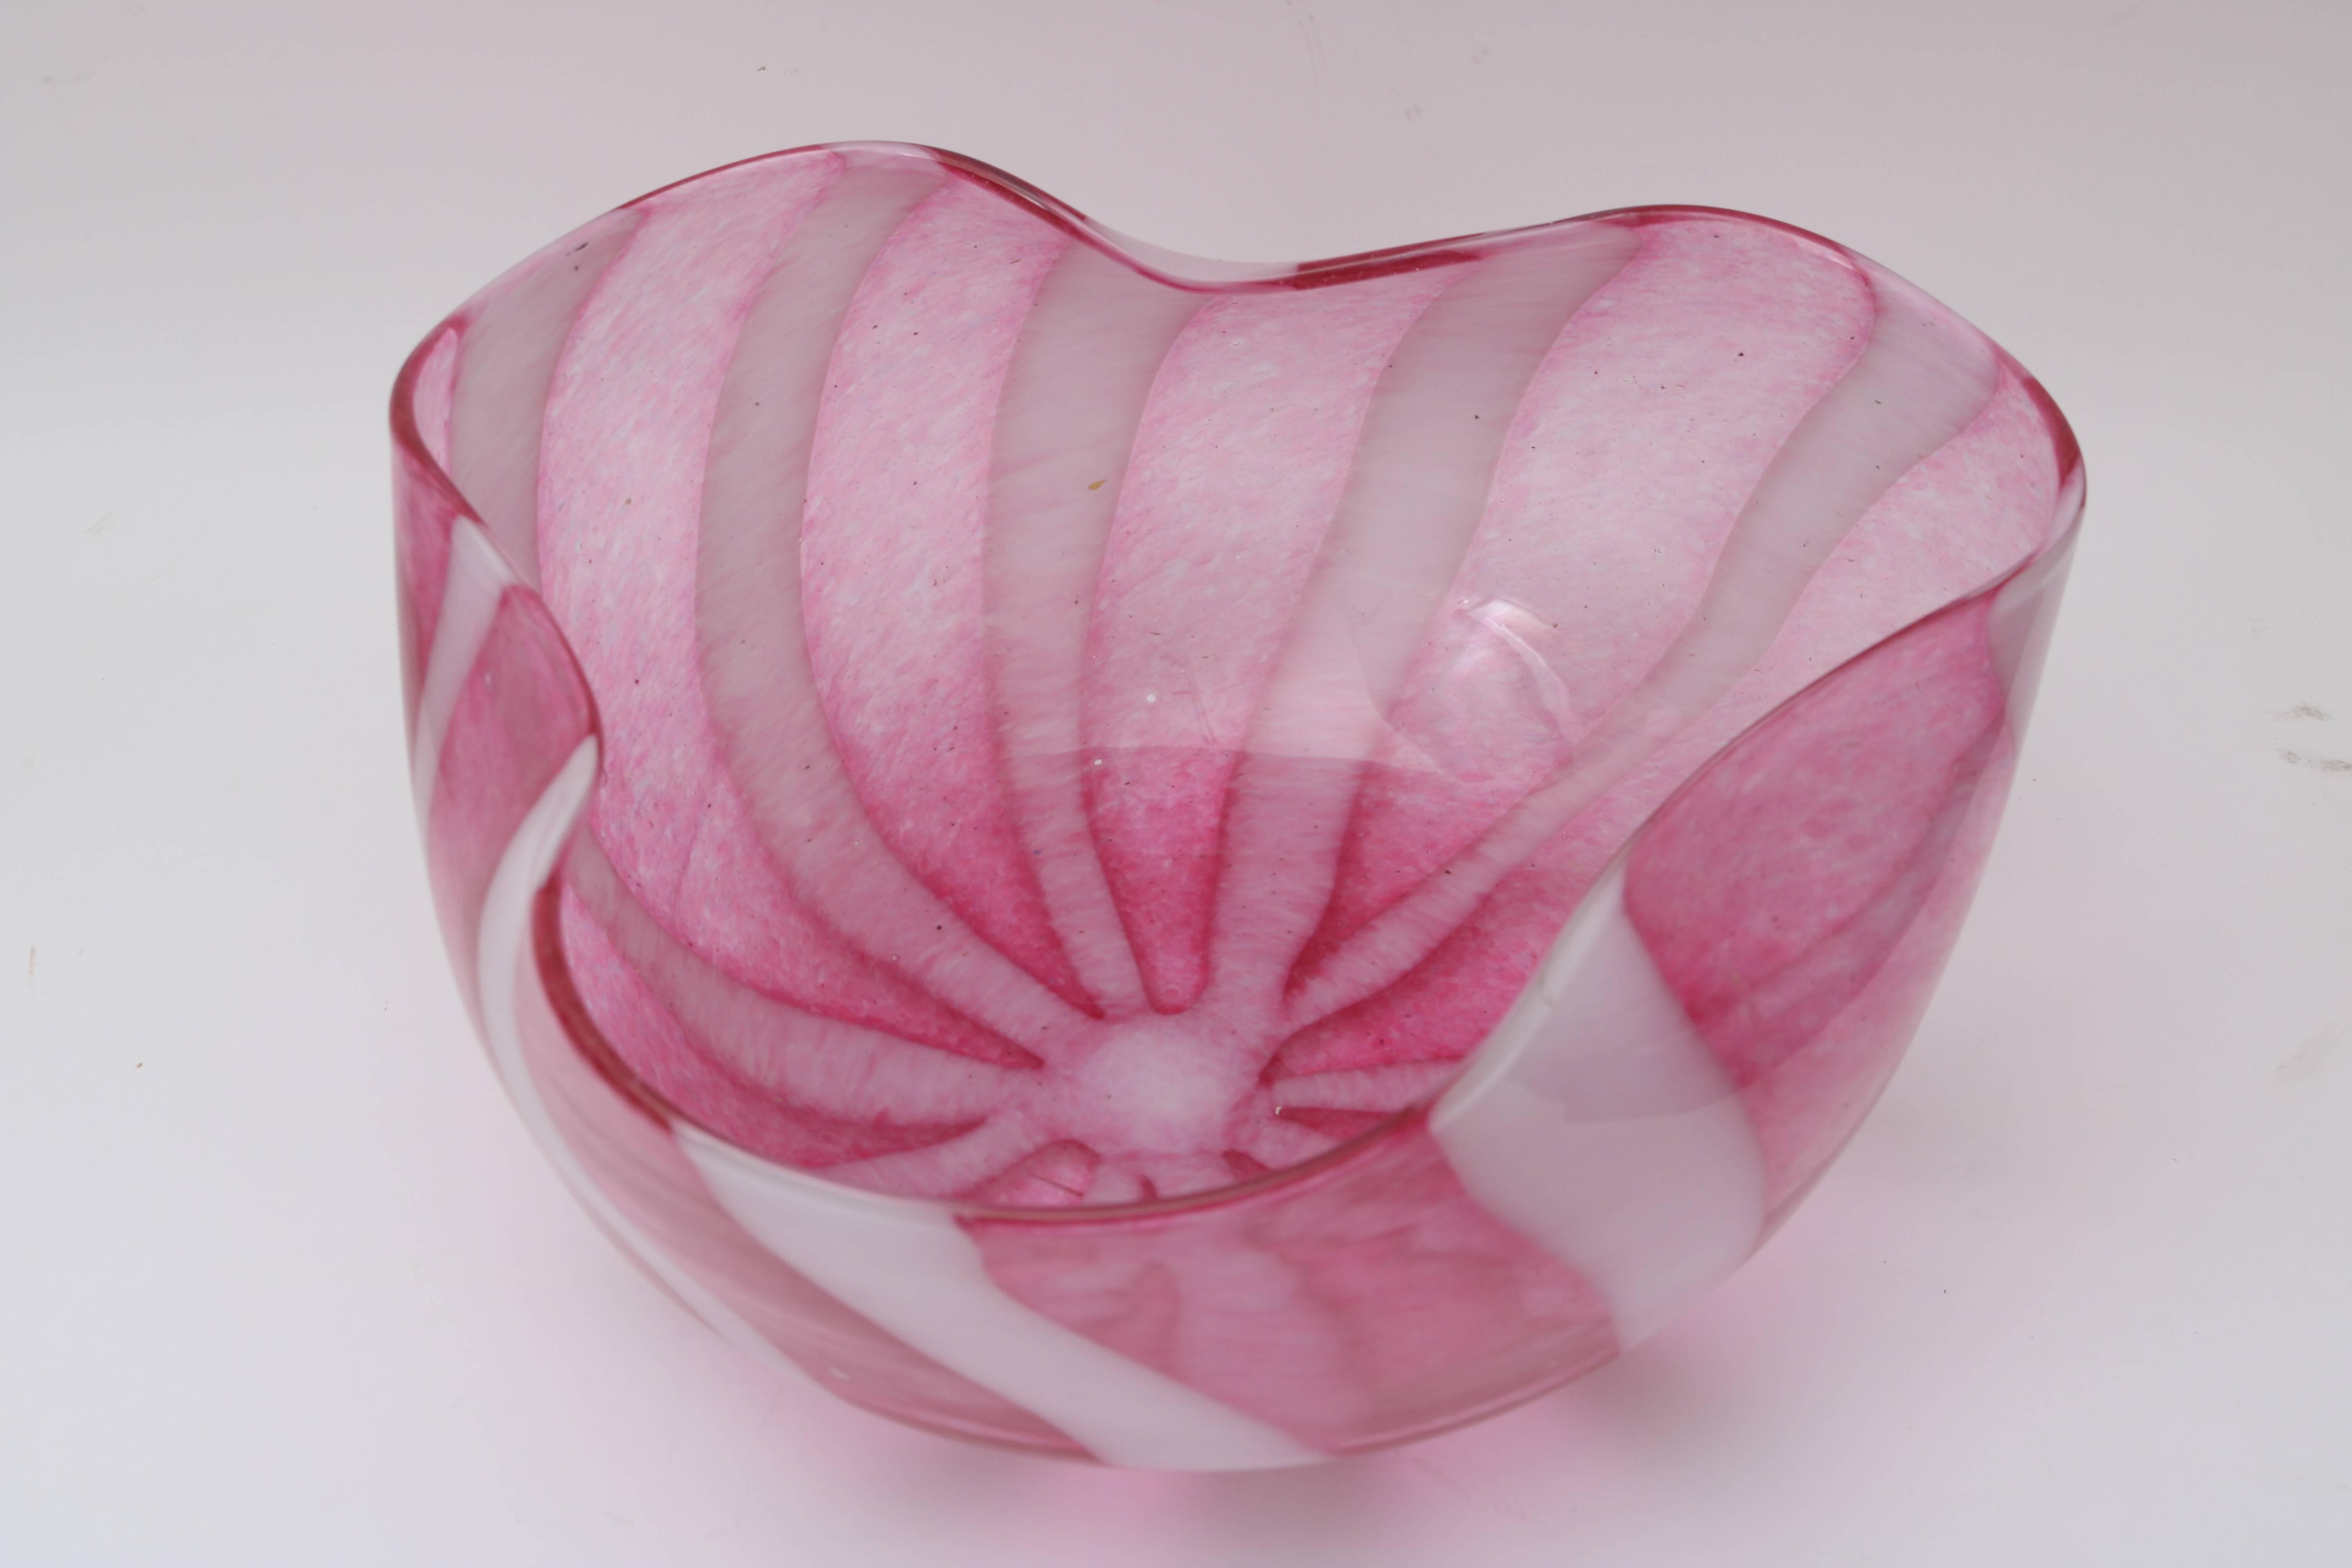 This stylish Murano glass bowl dates from the Mid-Century and seems to capture an open flower bloom with its free-formed rim. The colors are a translucent raspberry and white in a ribbon motif.

For best net trade price or additional questions